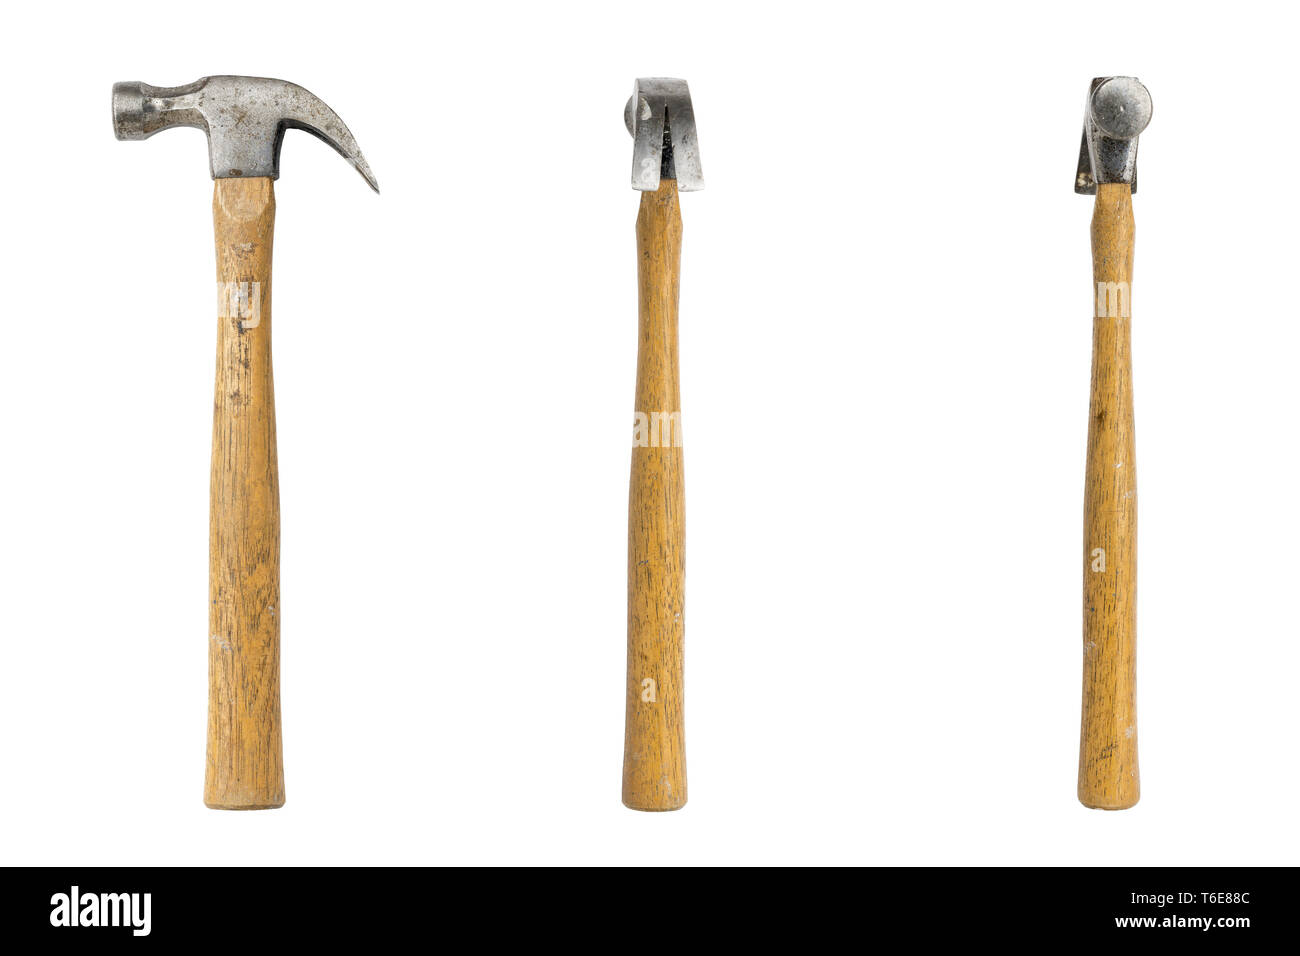 Old claw hammer seen from three sides Stock Photo